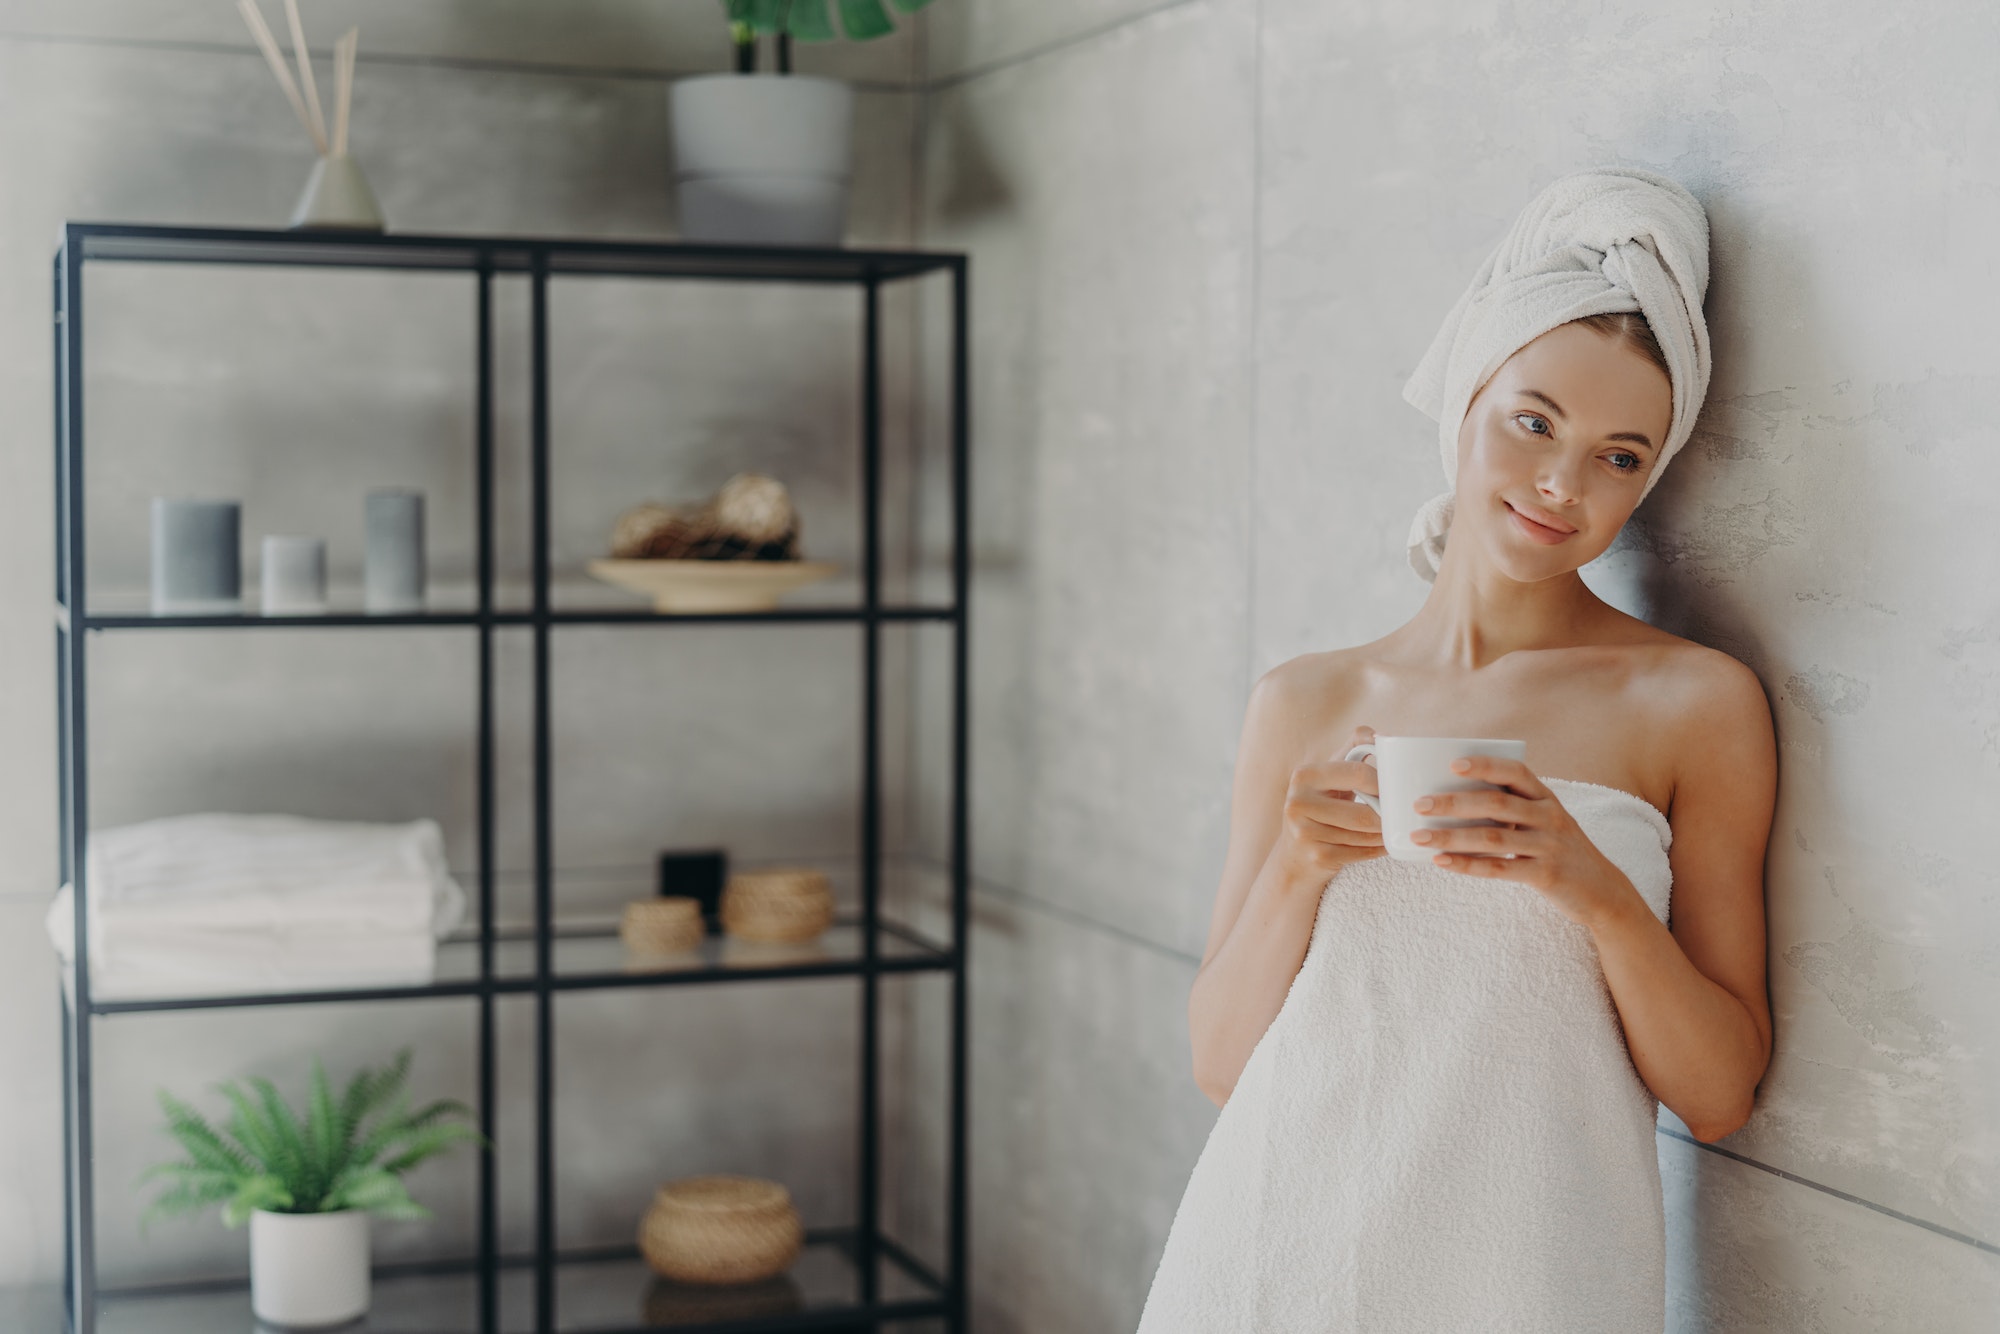 Calm relaxed woman poses in towel against bathroom interior, wrapped in bath towel